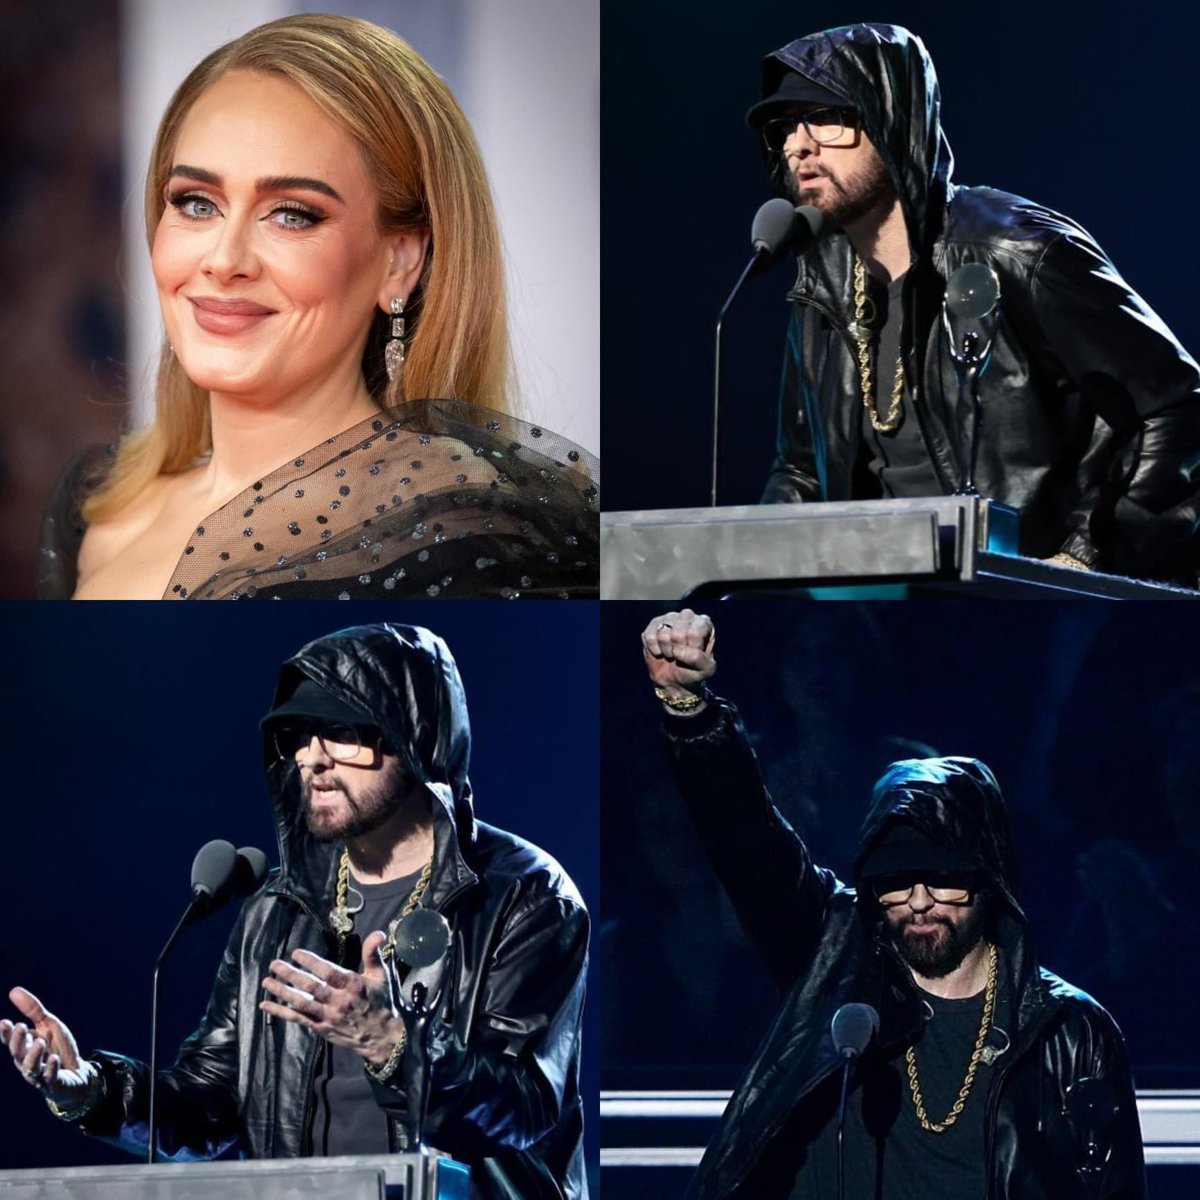 'If Adele speaks well of you, no matter what the critics say, she is very legendary.' — @Eminem yesterday during his speech at his induction into the Rock & Roll Hall of Fame.